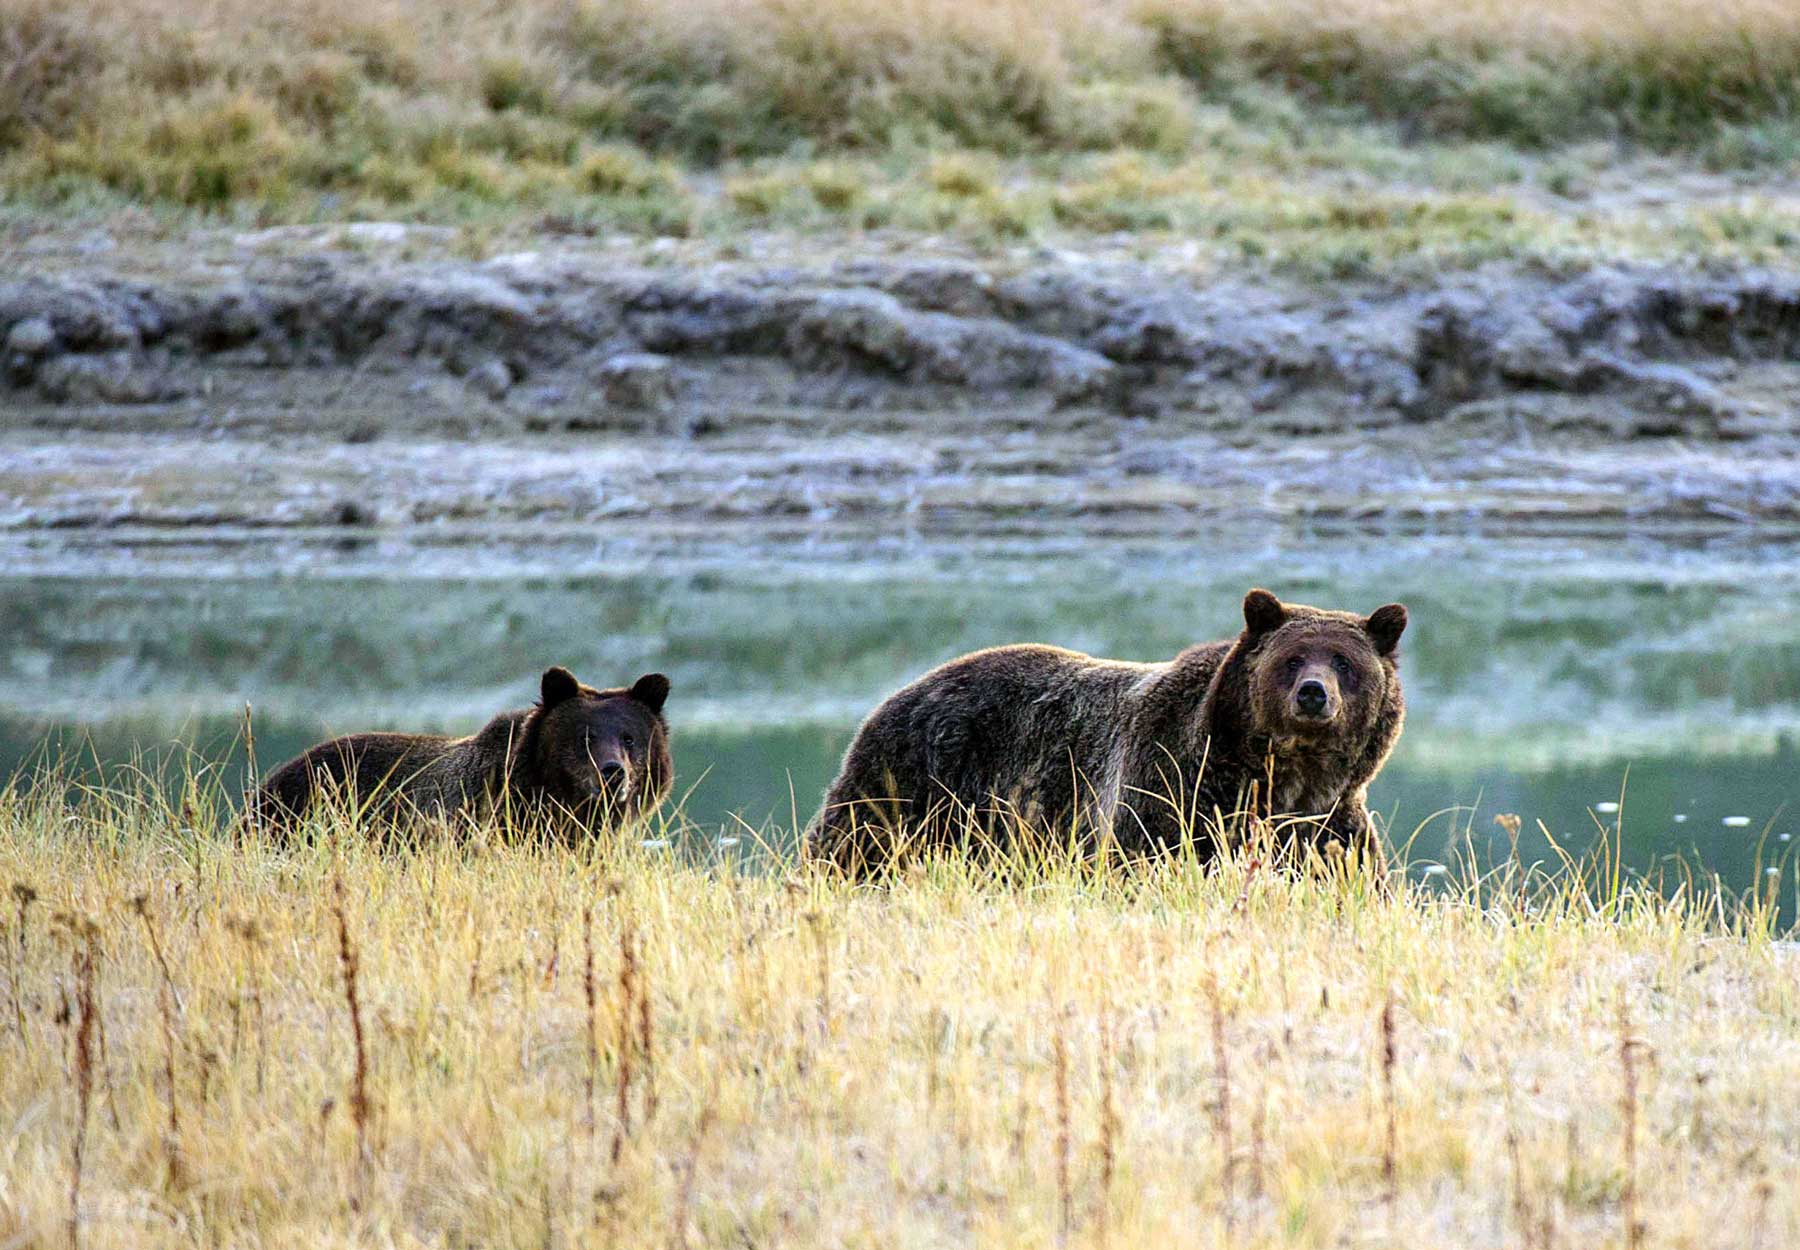 A Grizzly bear mother and her cub walk near Pelican Creek October 8, 2012 in the Yellowstone National Park in Wyoming. (Karen Bleier/AFP/Getty Images)